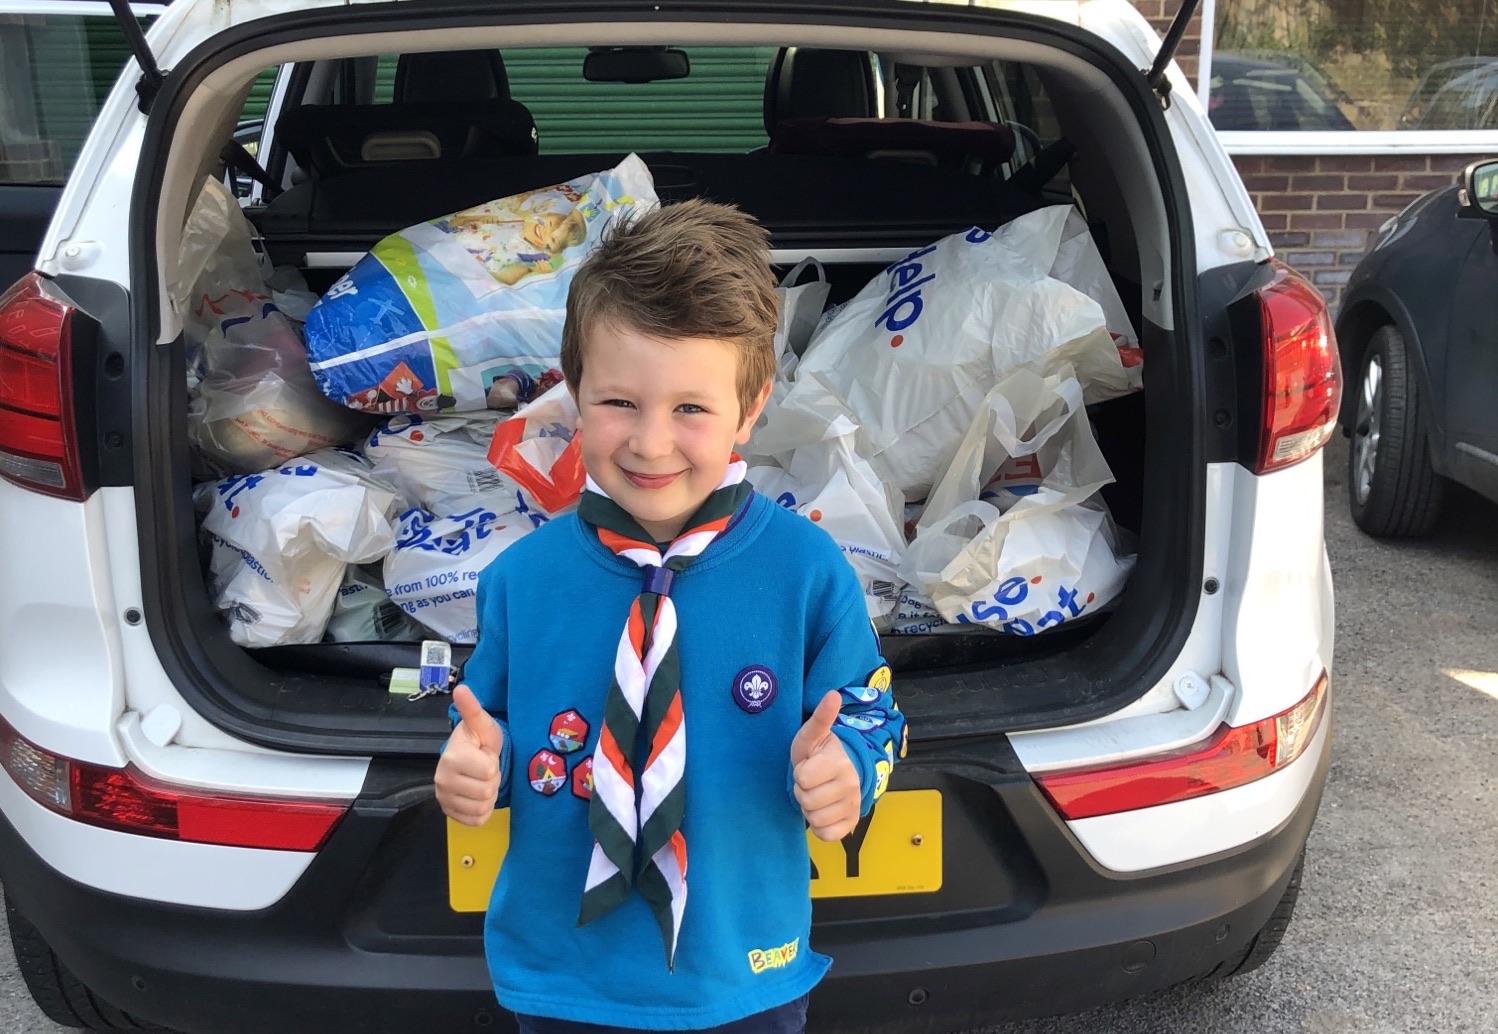 Henry's wearing his Beavers uniform with a necker, holding both his thumbs up and smiling at the camera. He's standing in front of a car boot which has lots of bags of shopping in.